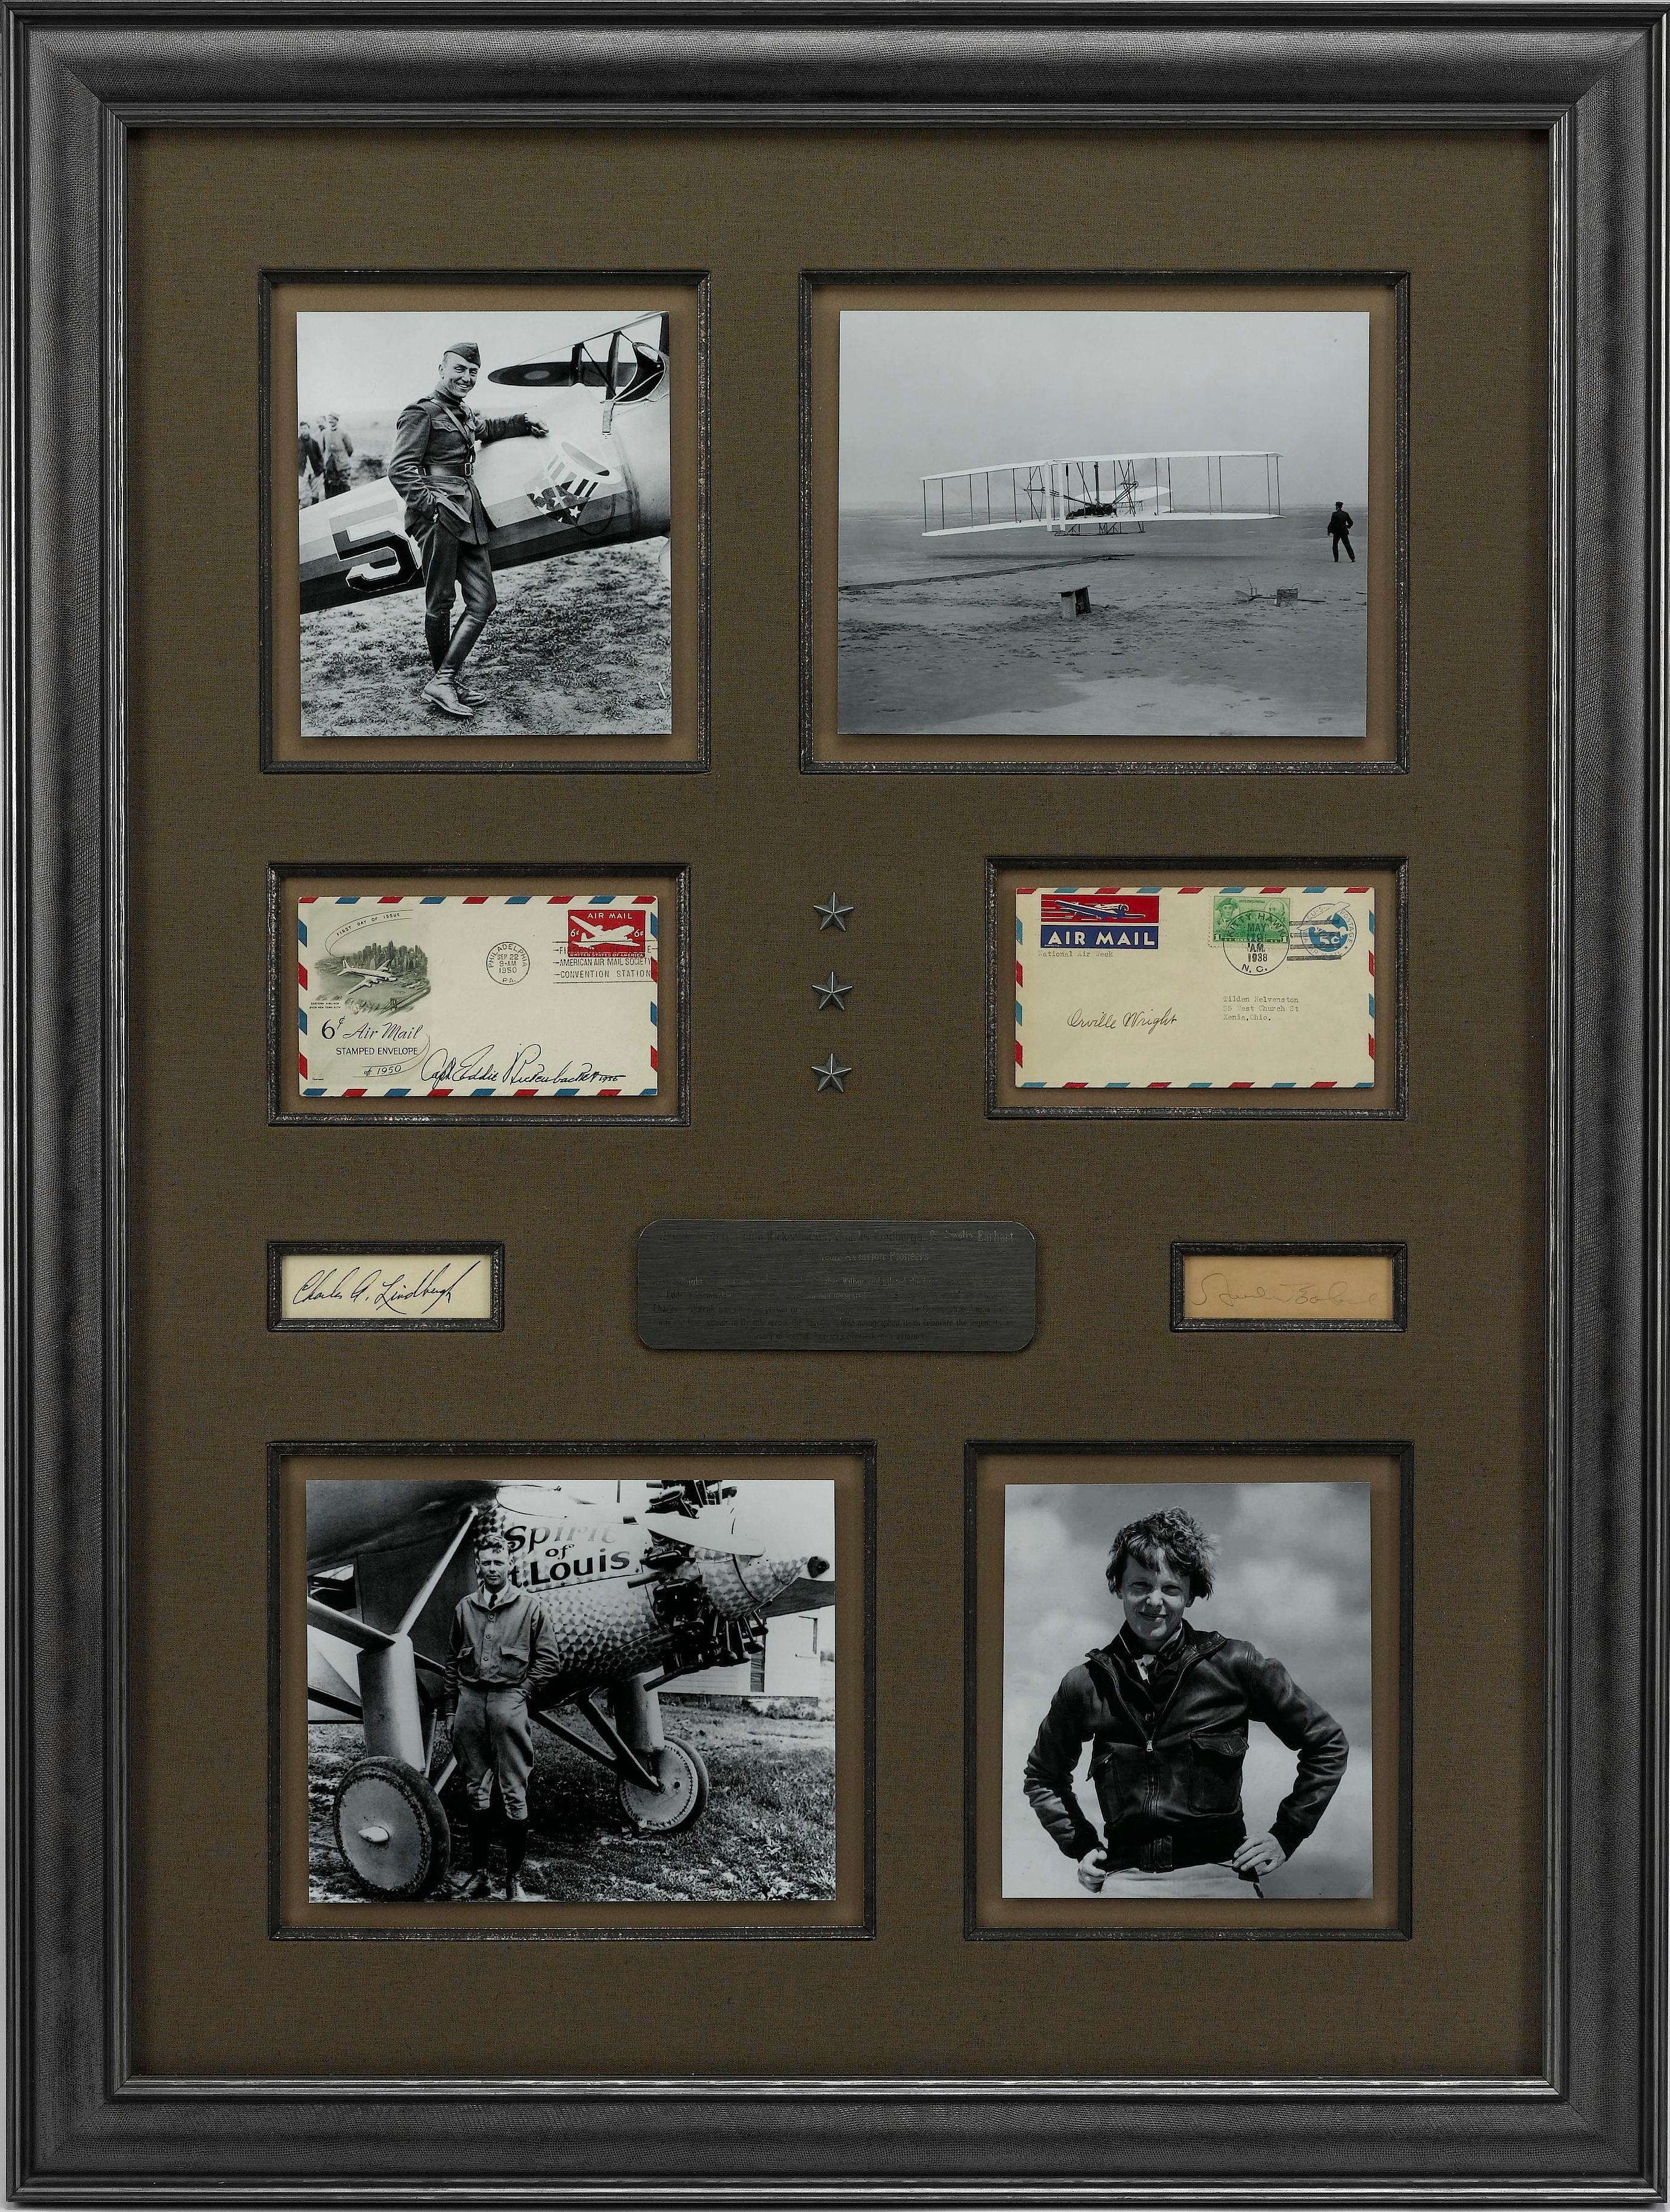 This aviation signature collage celebrates four great American pioneers of flight- Orville Wright, Eddie Rickenbacker, Charles Lindbergh, and Amelia Earhart. Orville Wright, along with his brother Wilber, invented the airplane and was the pilot of